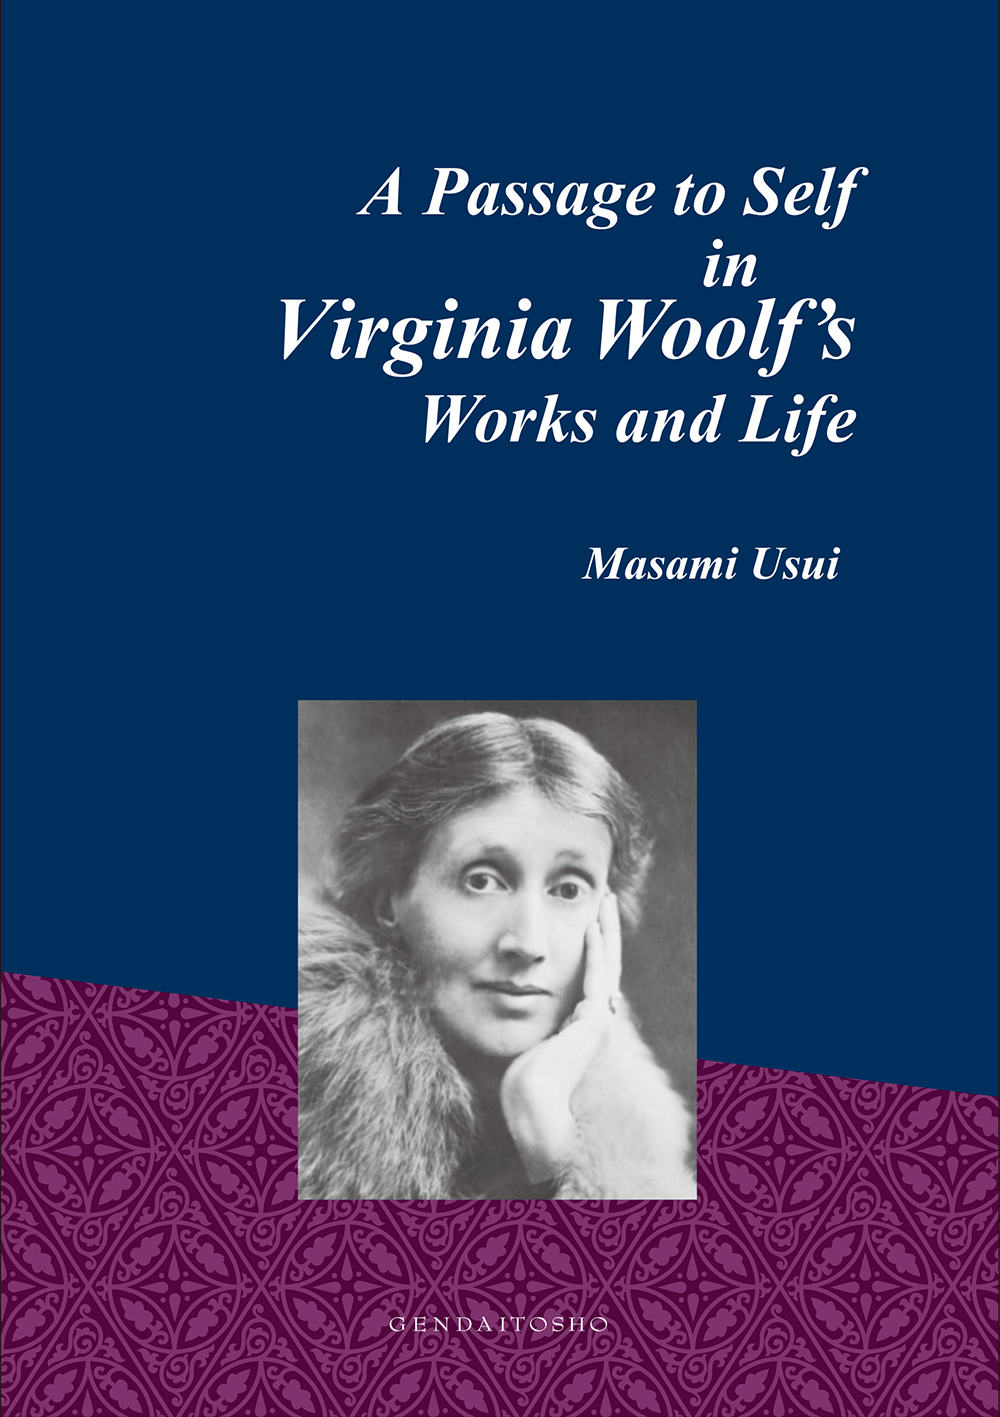 A Passage to Self in Virginia Woolf’s Works and Life